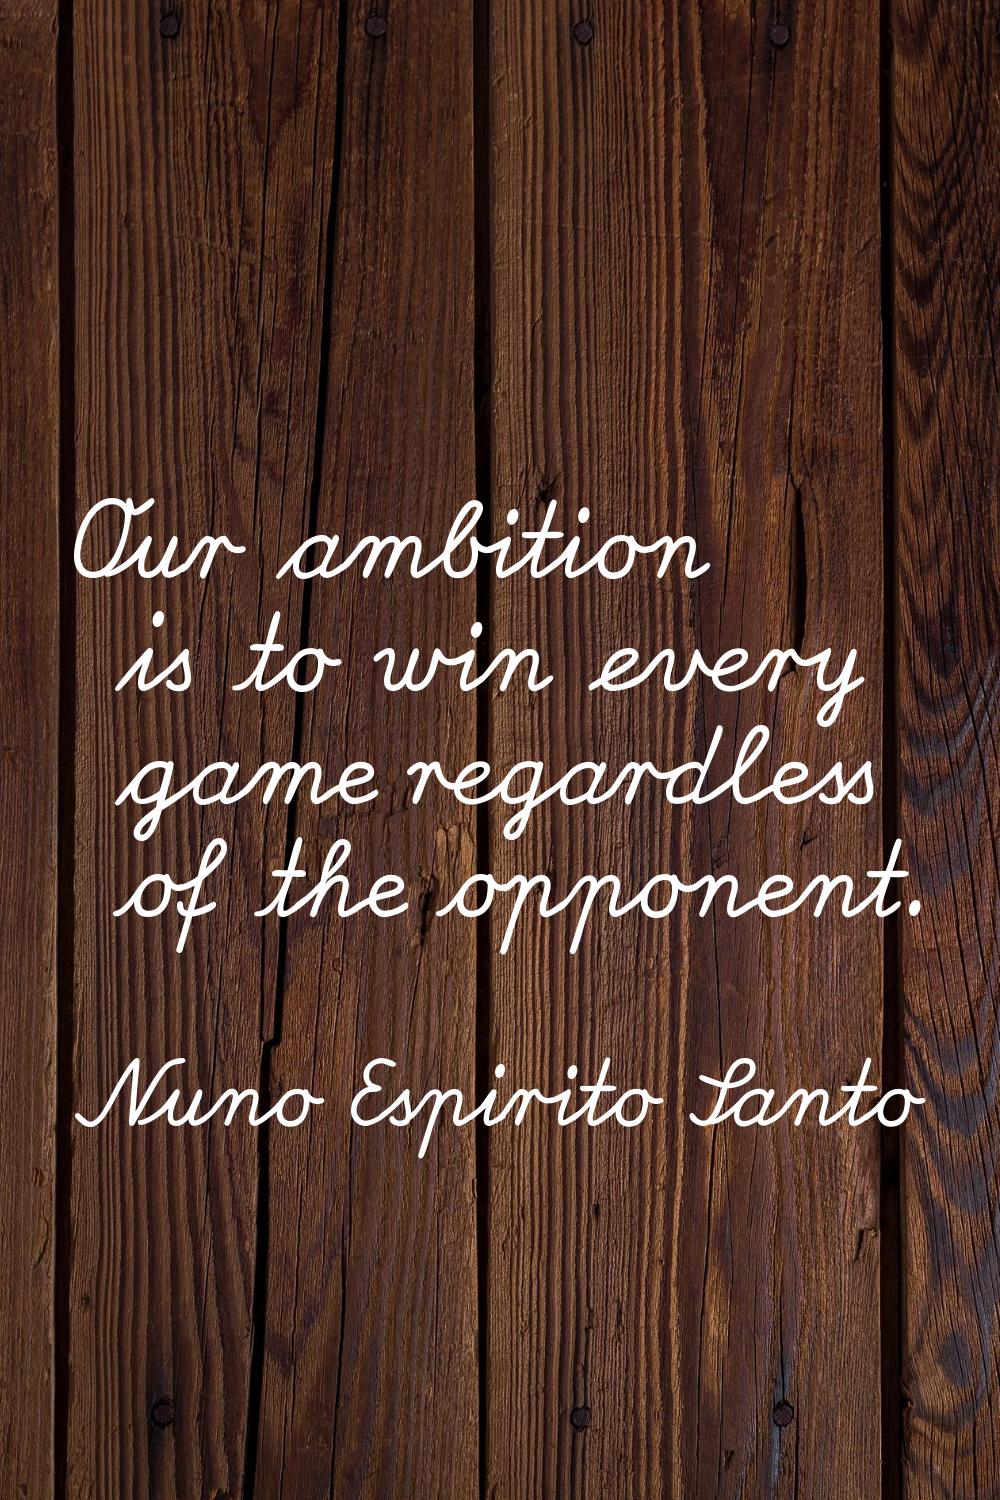 Our ambition is to win every game regardless of the opponent.